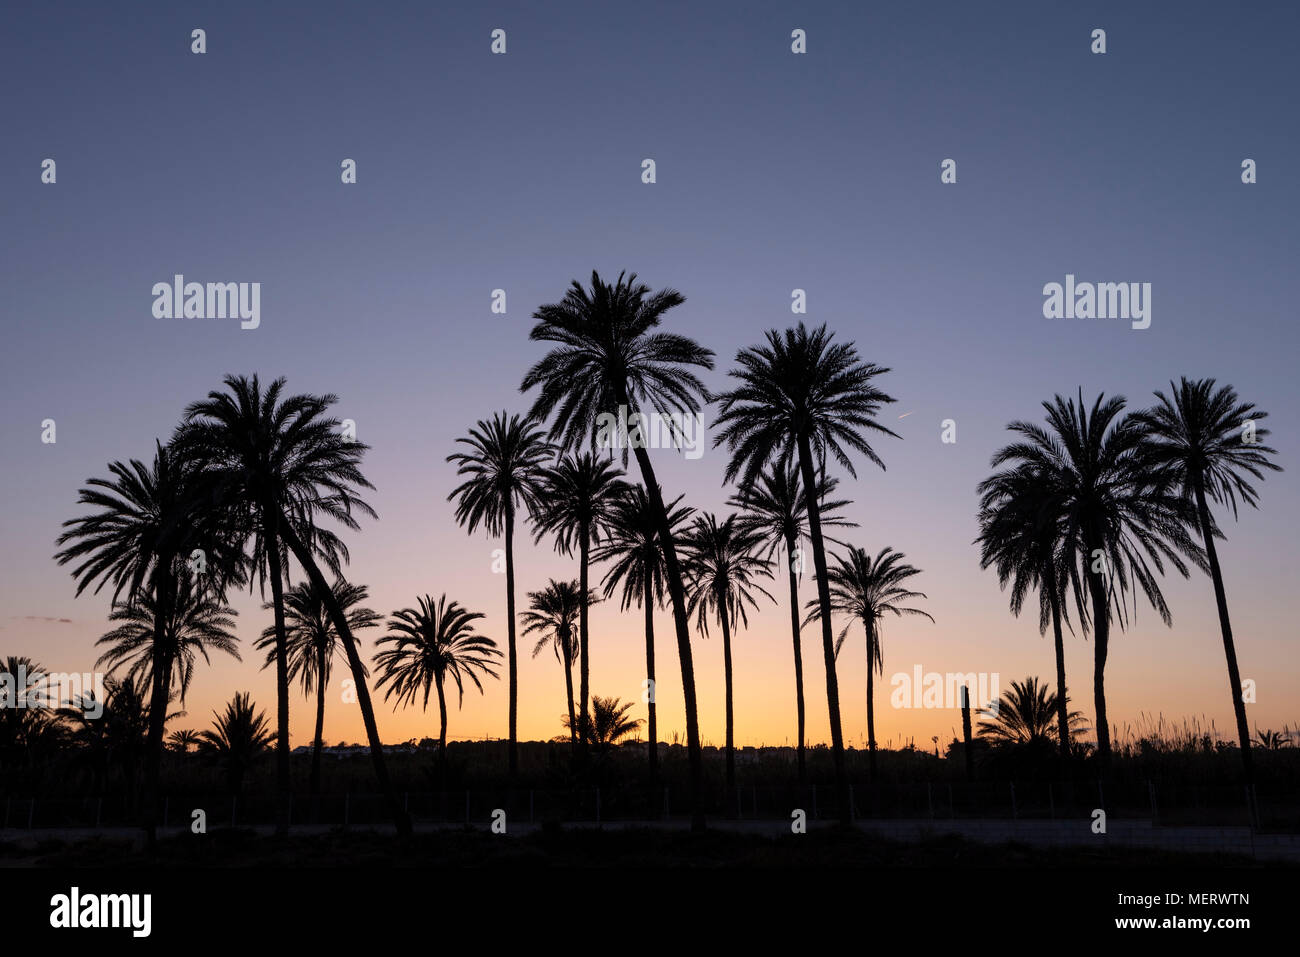 Sunset with palm tree grove silhouetted, blue sky with golden sun,Cala ferris, Torrevieja,Costa Blanca, Spain Stock Photo